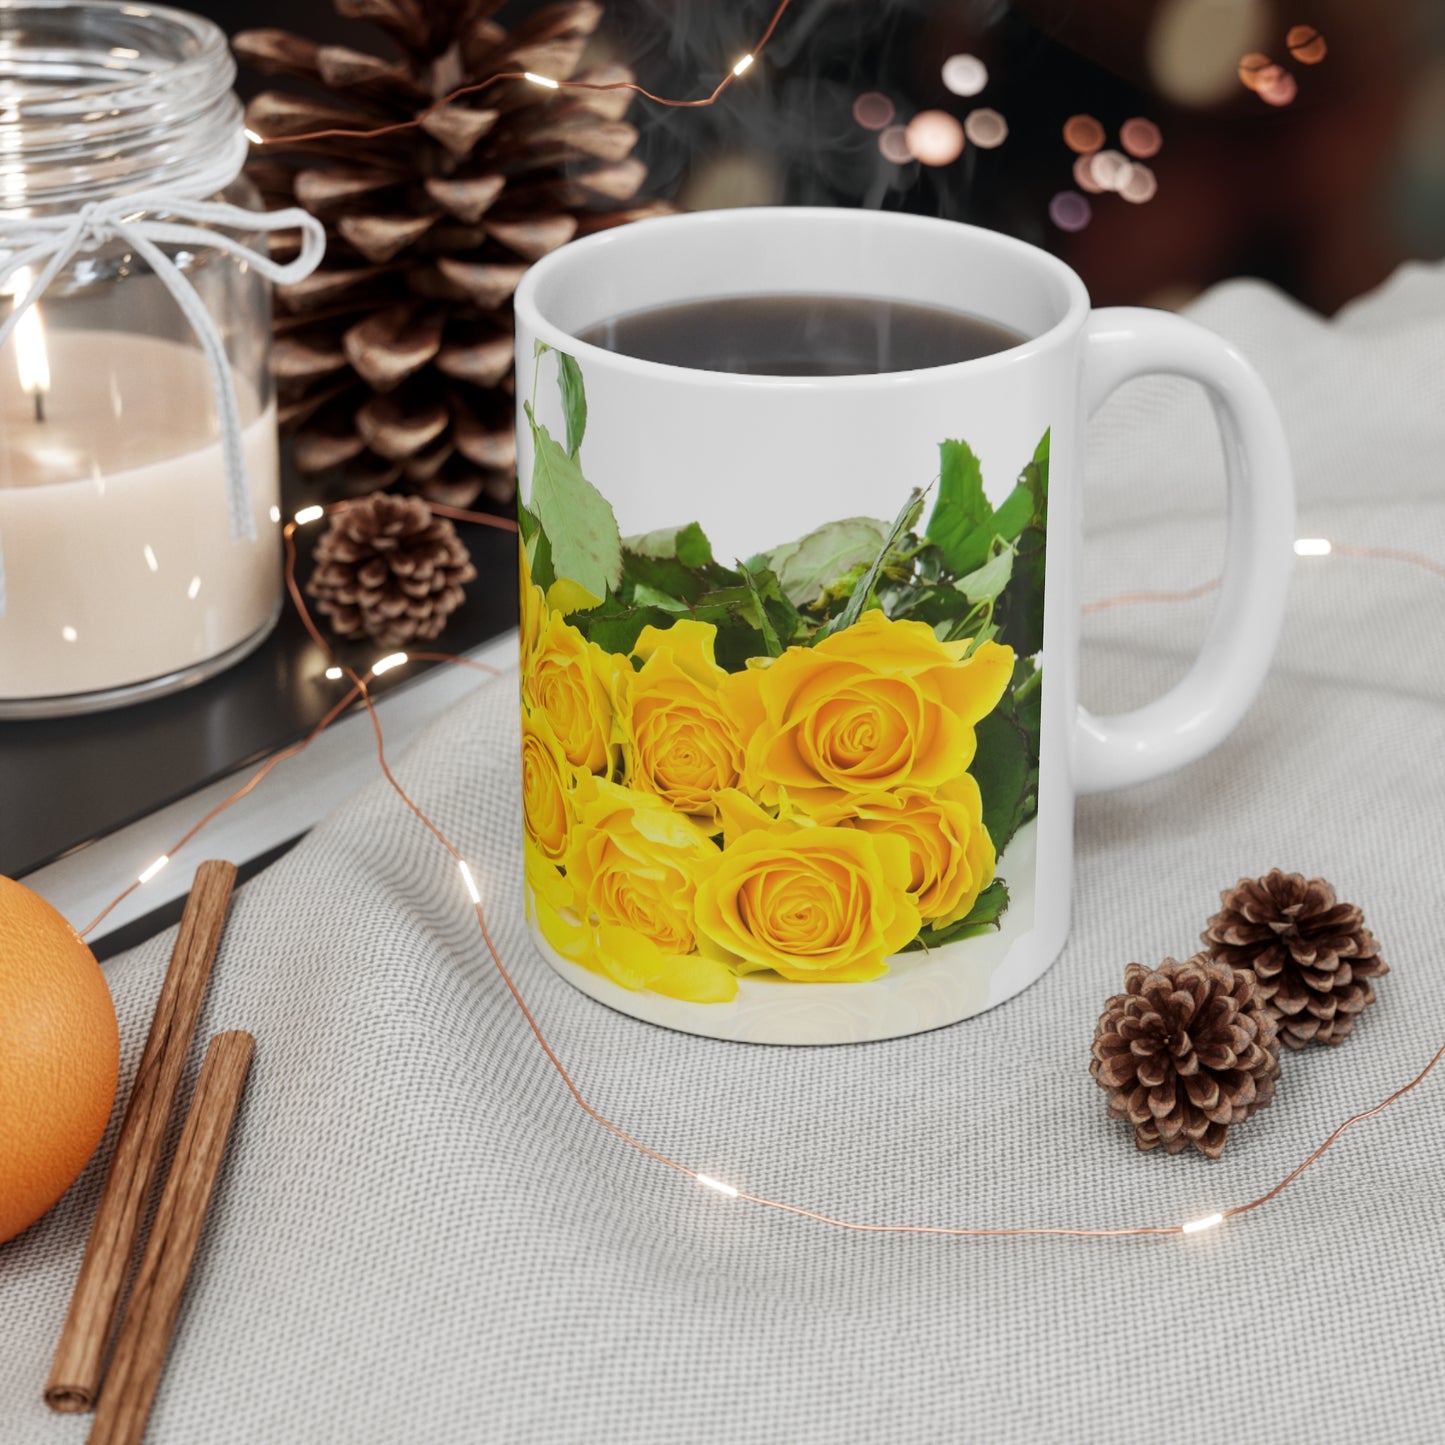 Give Mom a coffee cup that will remind her of your love every time she uses it. “I love you, Mom!” with beautiful yellow roses to brighten up her day.